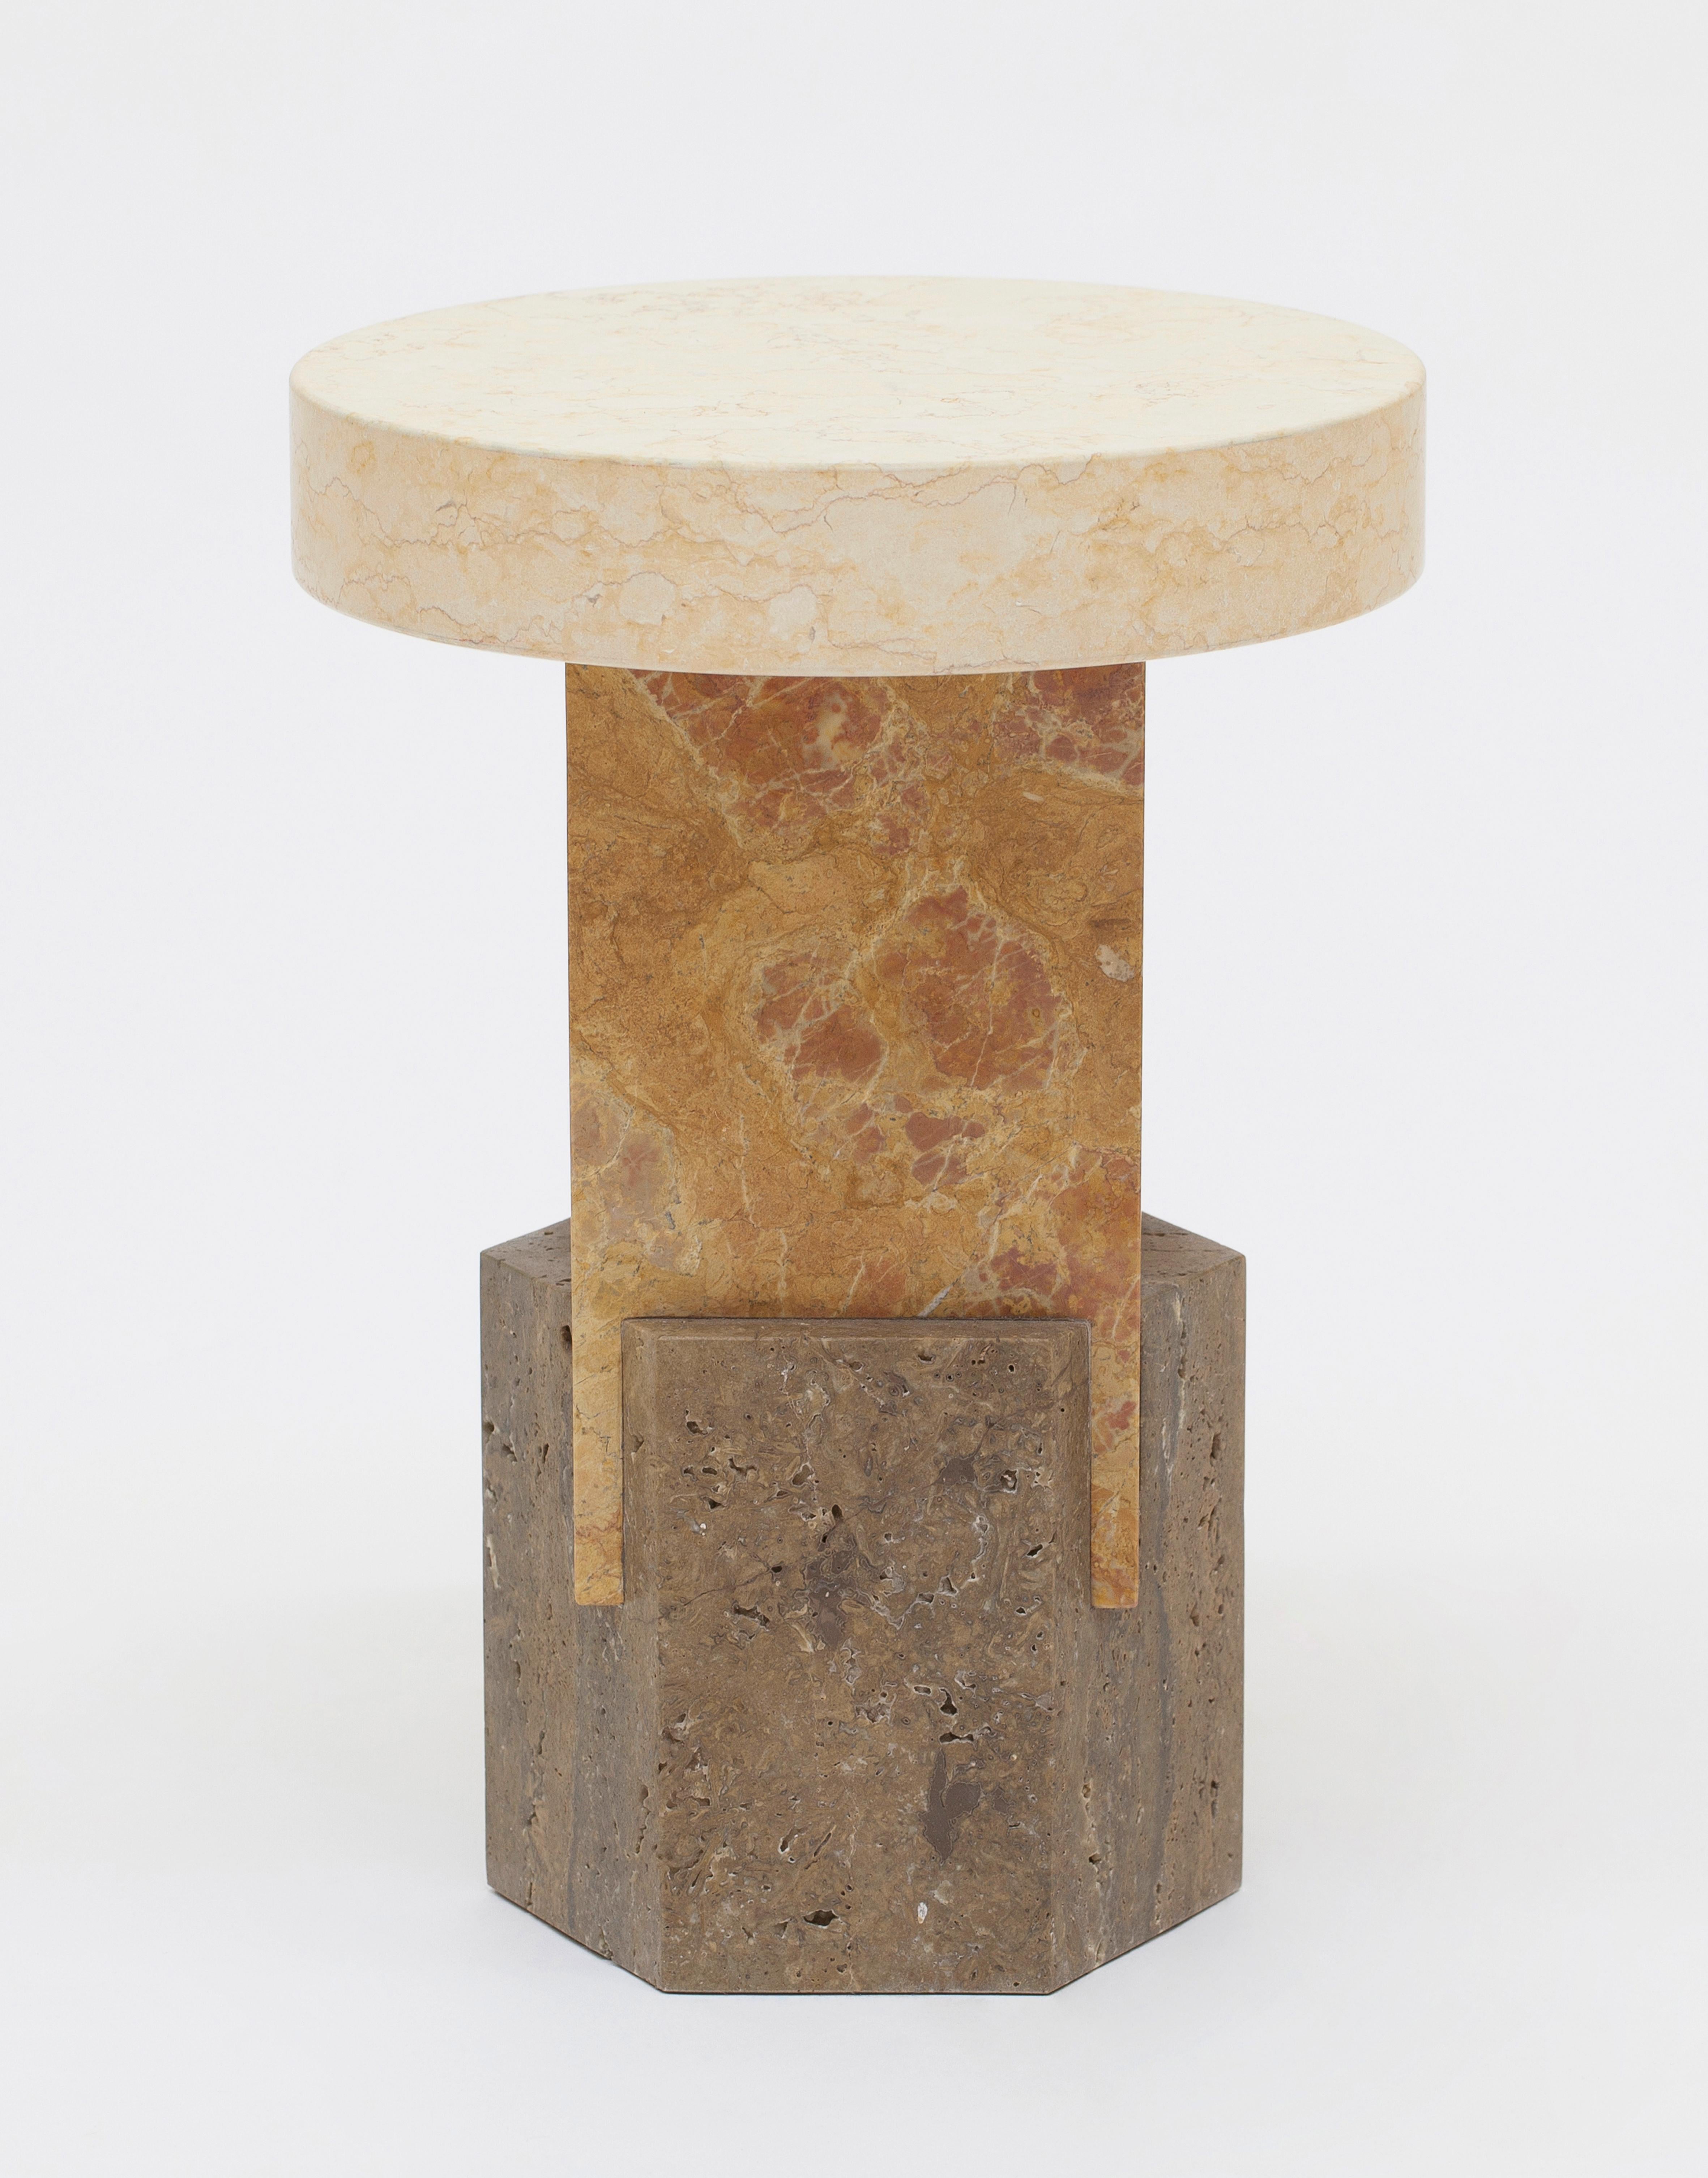 Marble Dorik Chroma stool by Oeuffice
Edition: 12 + 2AP
2014
Dimensions: 30 x 30 x 42 cm
Materials: Cipollino Apuano marble, Porfido Red marble, Luzerna stone in aged yellow

Kapital is a series of limited edition tables and stools based on